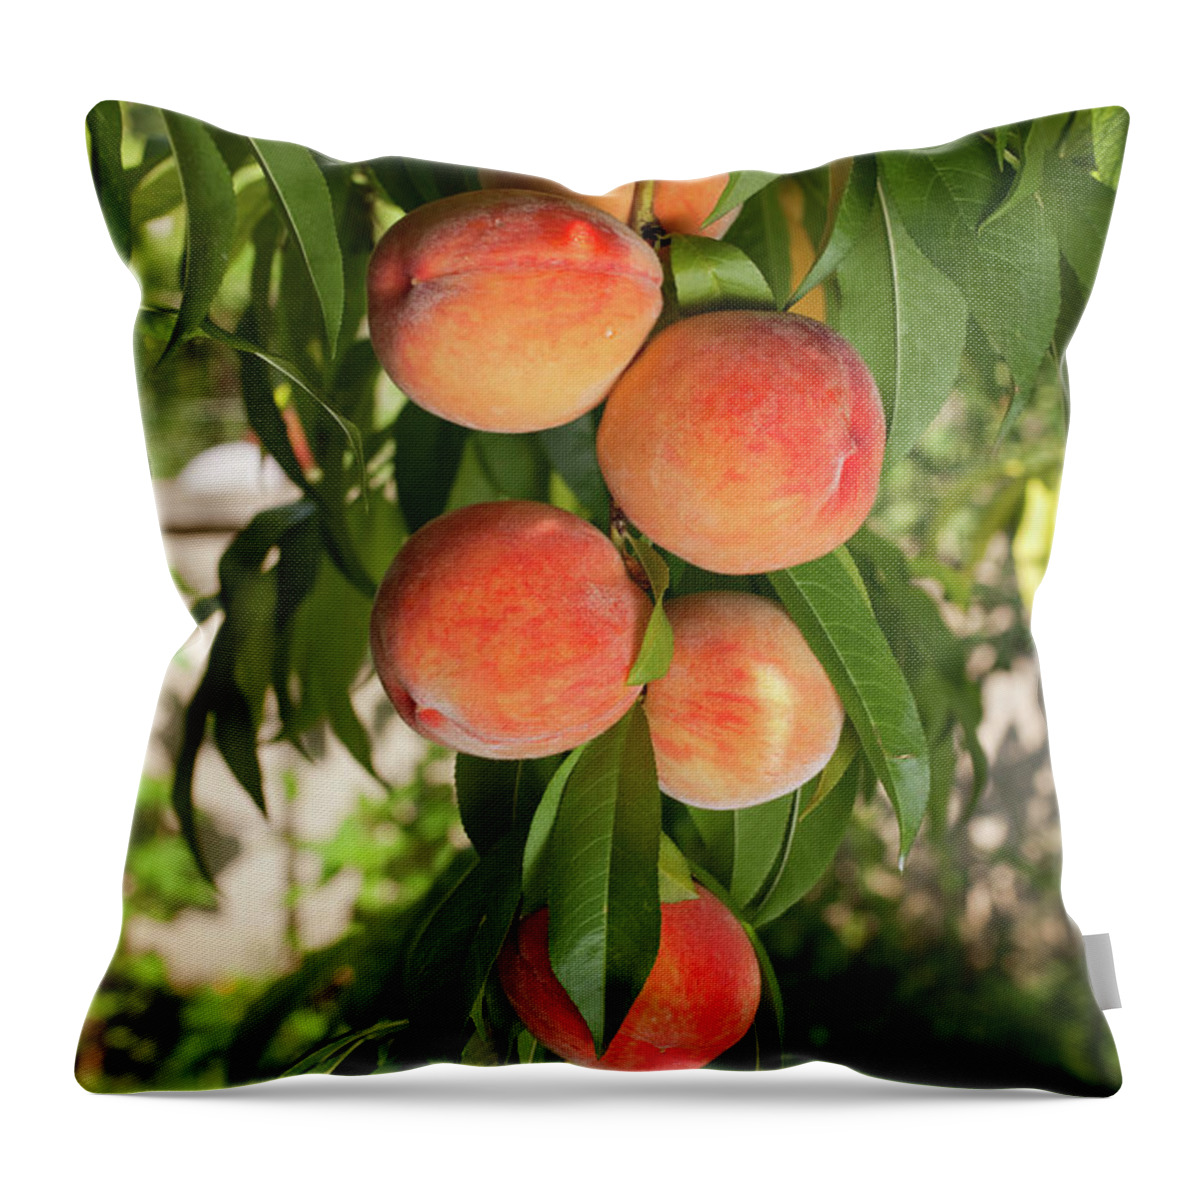 Saturated Color Throw Pillow featuring the photograph Ripe Juicy Red Peaches by Mixmike